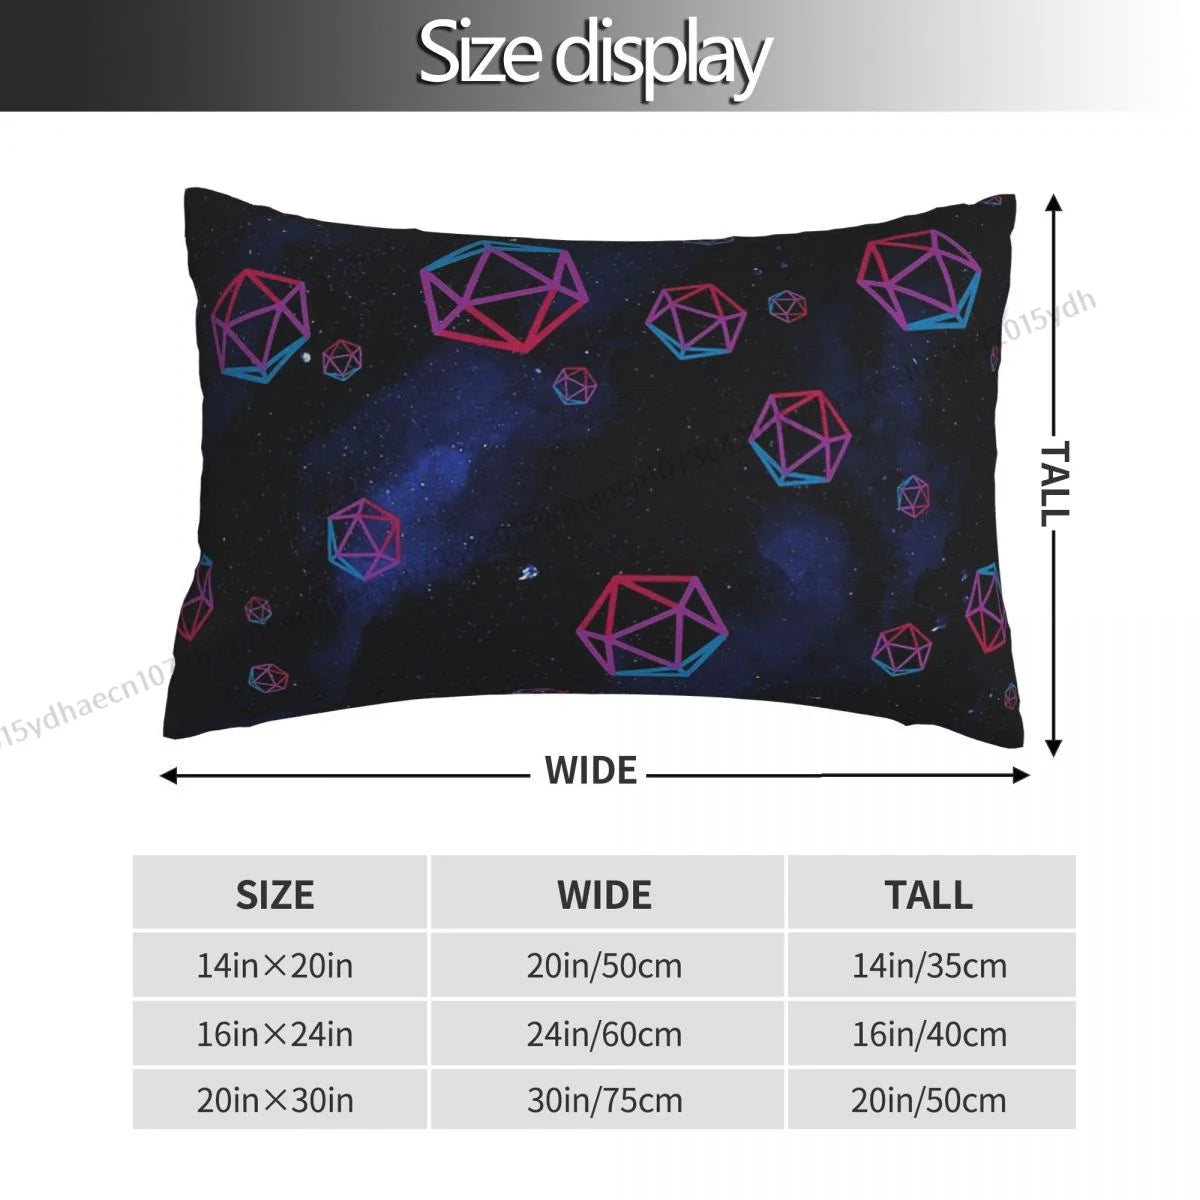 Dice In Space Hug Pillowcase DnD Game Backpack Cojines Bedroom Printed Chair Pillow Covers Decorative